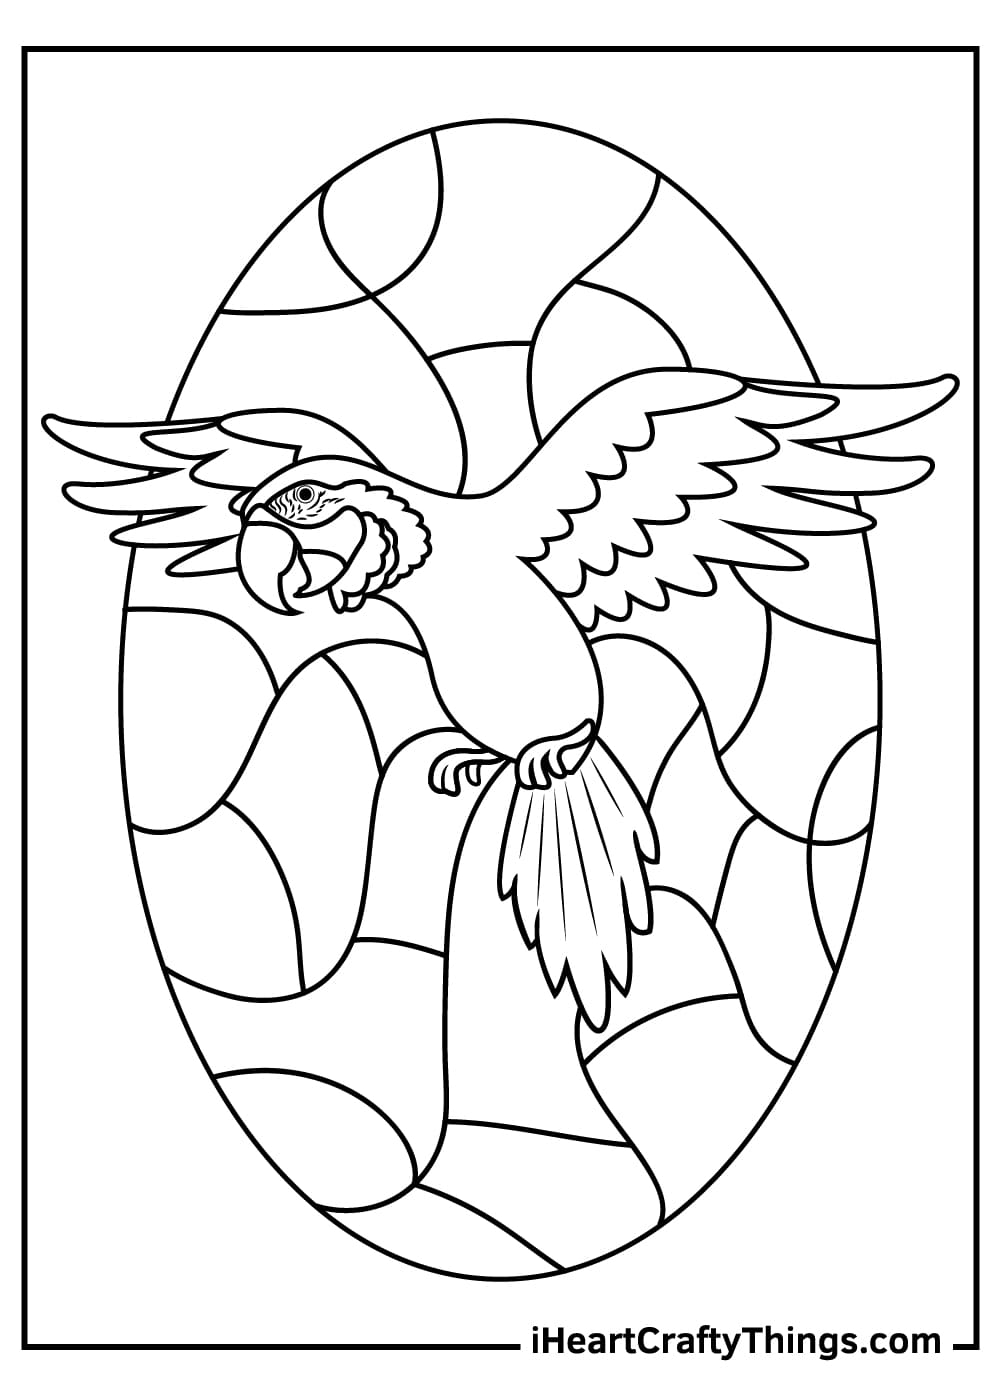 Parrot Image Coloring Page